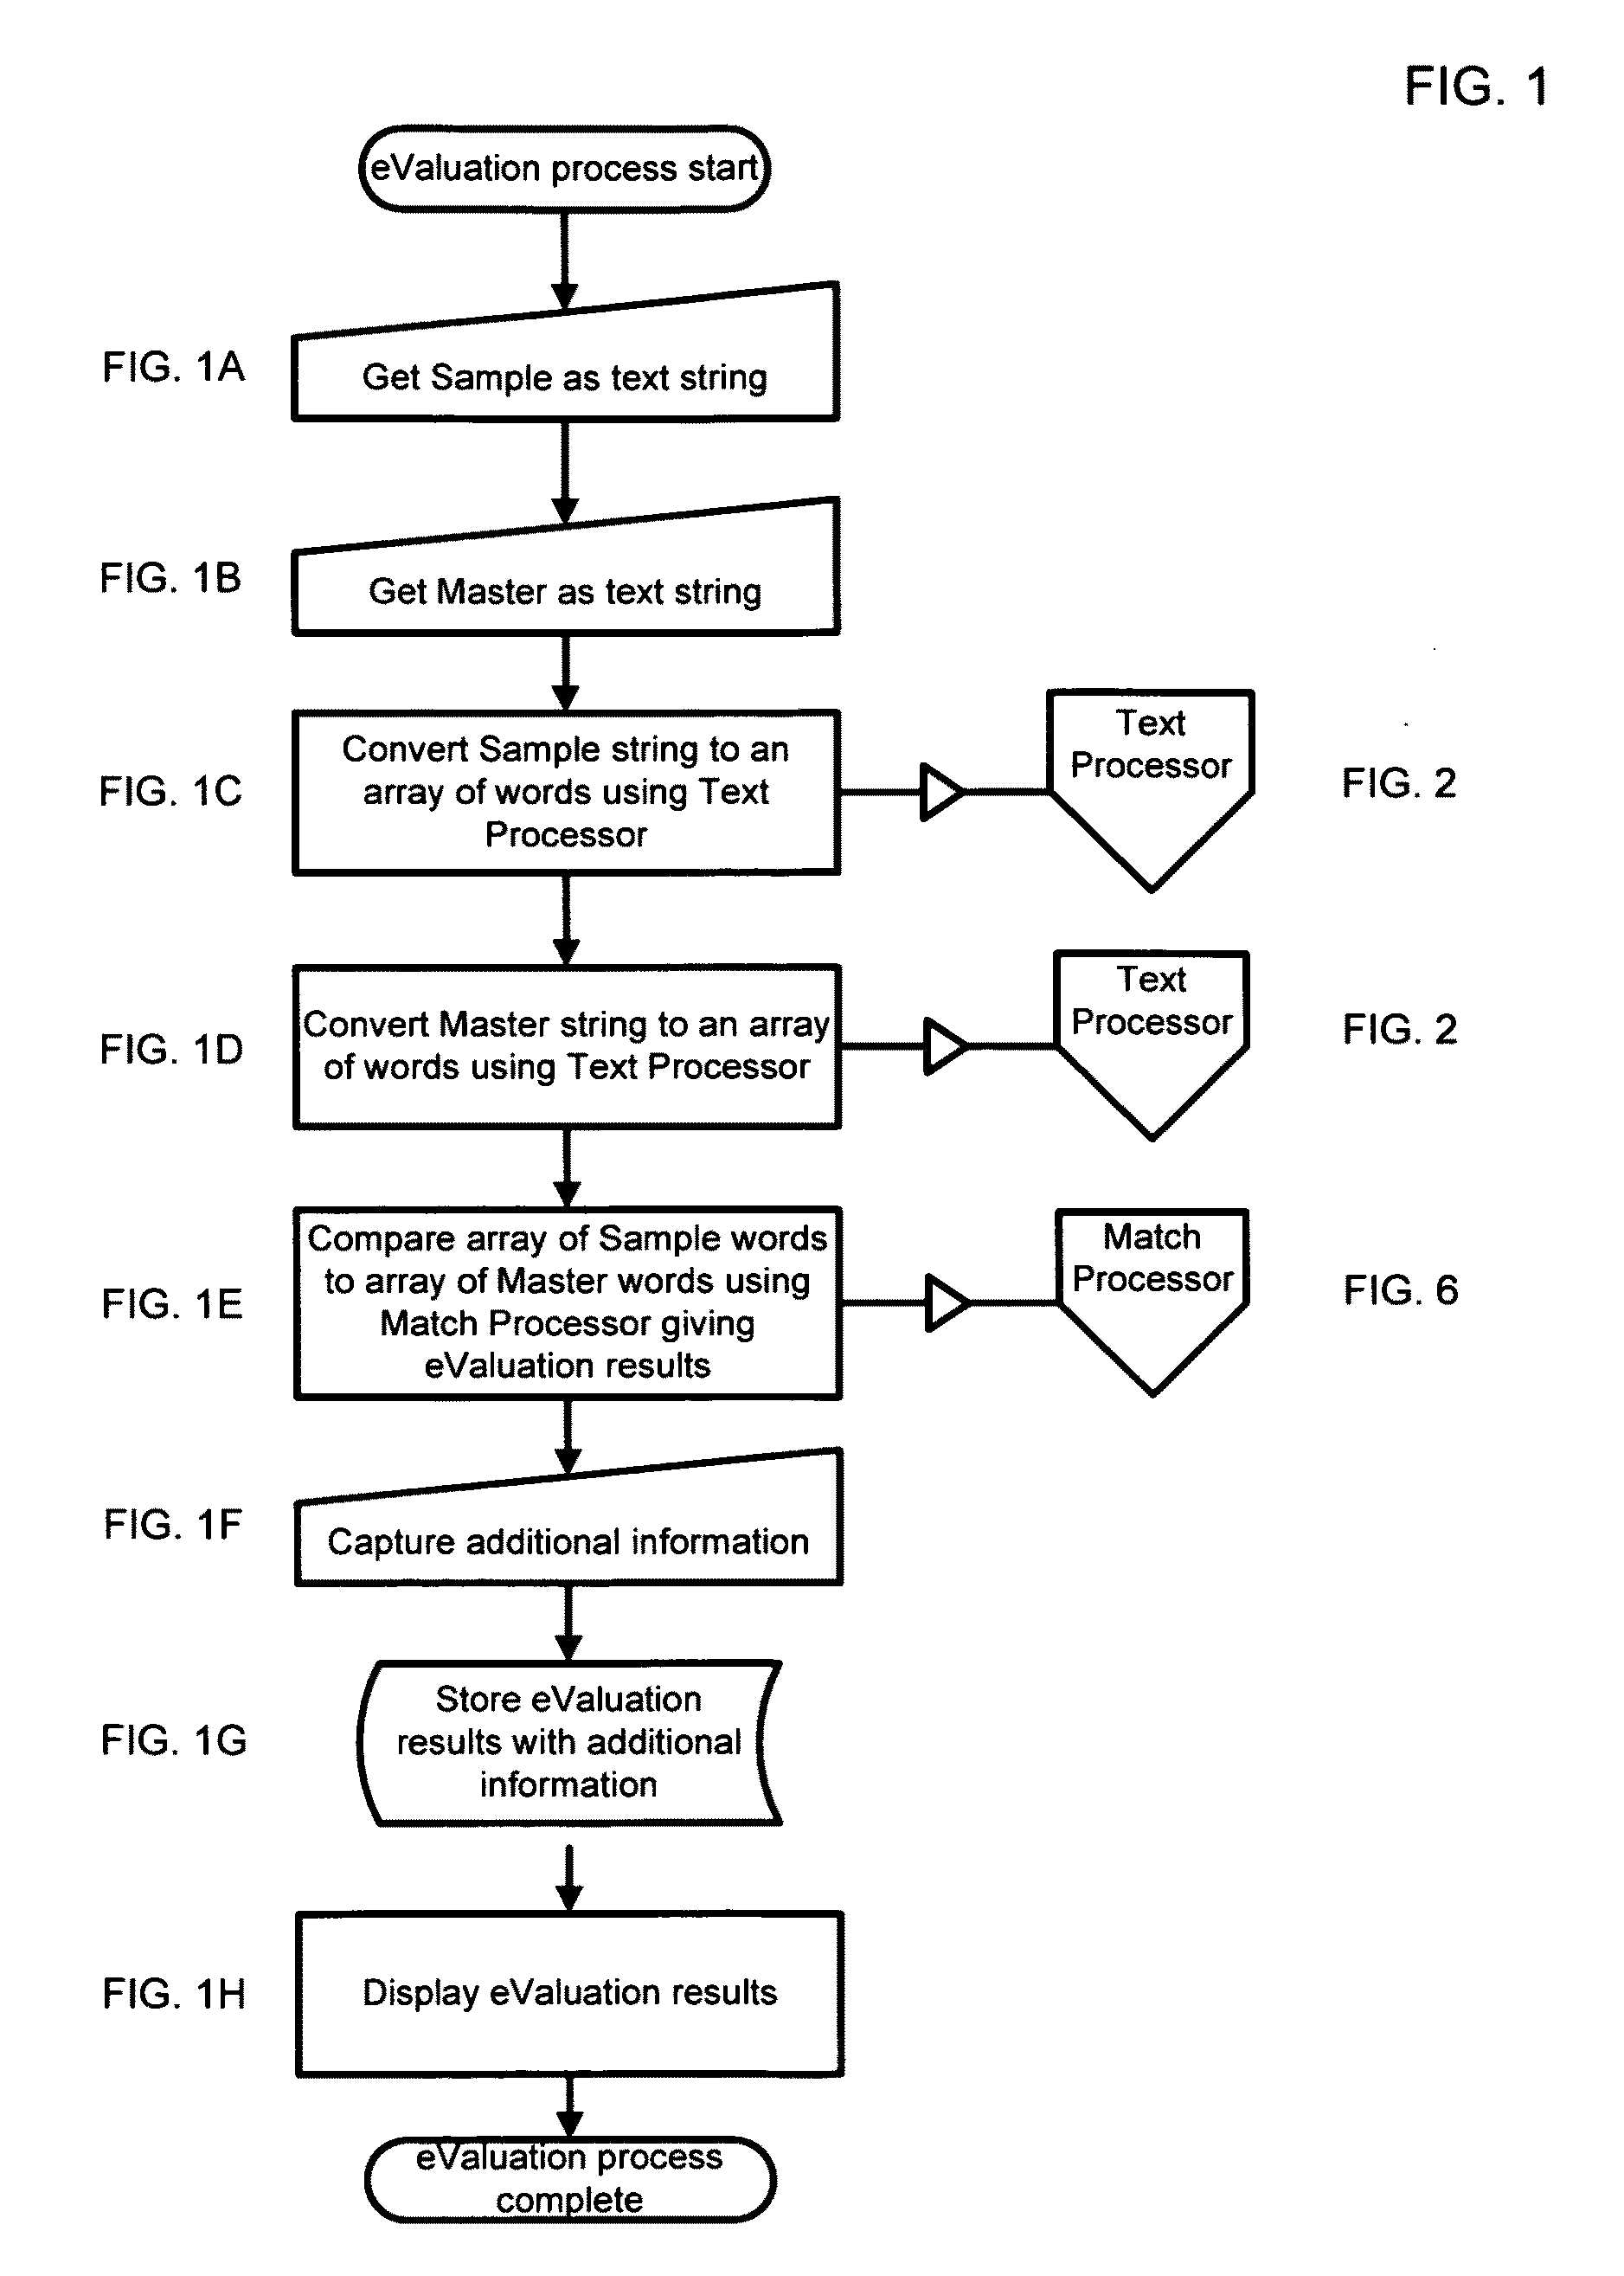 Method and process for performing category-based analysis, evaluation, and prescriptive practice creation upon stenographically written and voice-written text files